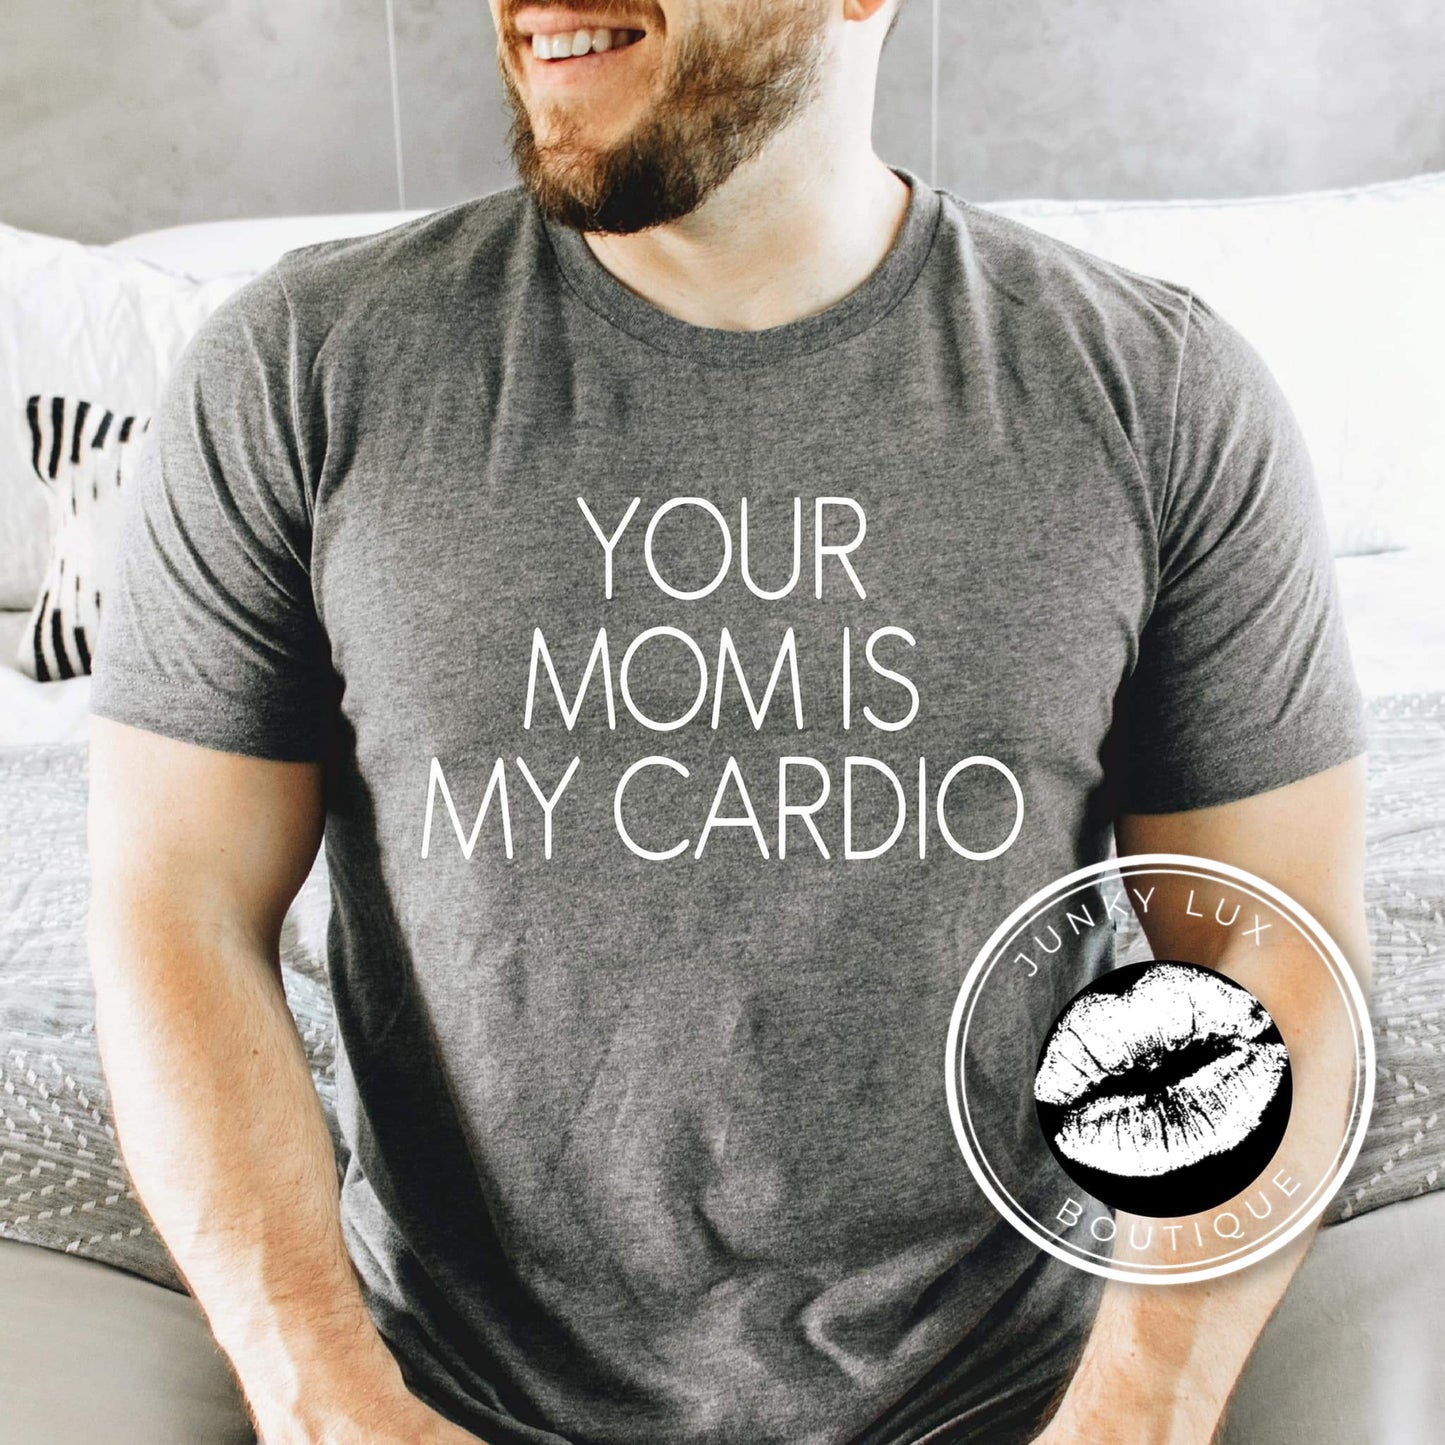 Your Mom Is My Cardio